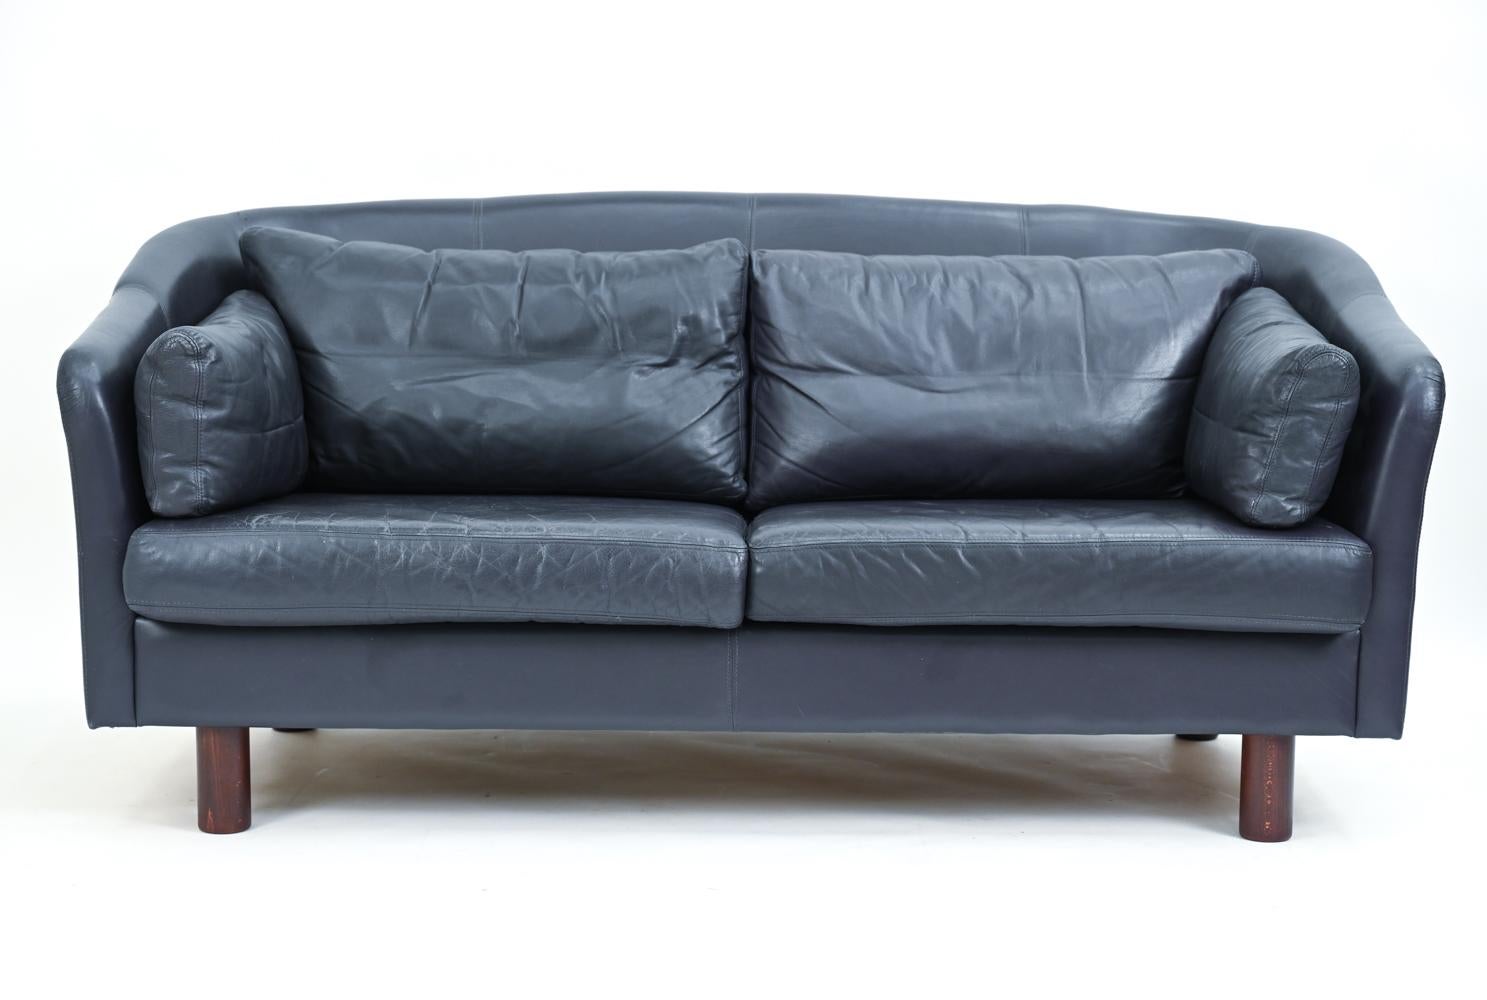 Pair of Swedish Modern Leather Sofas by Dux, c. 1970's 9